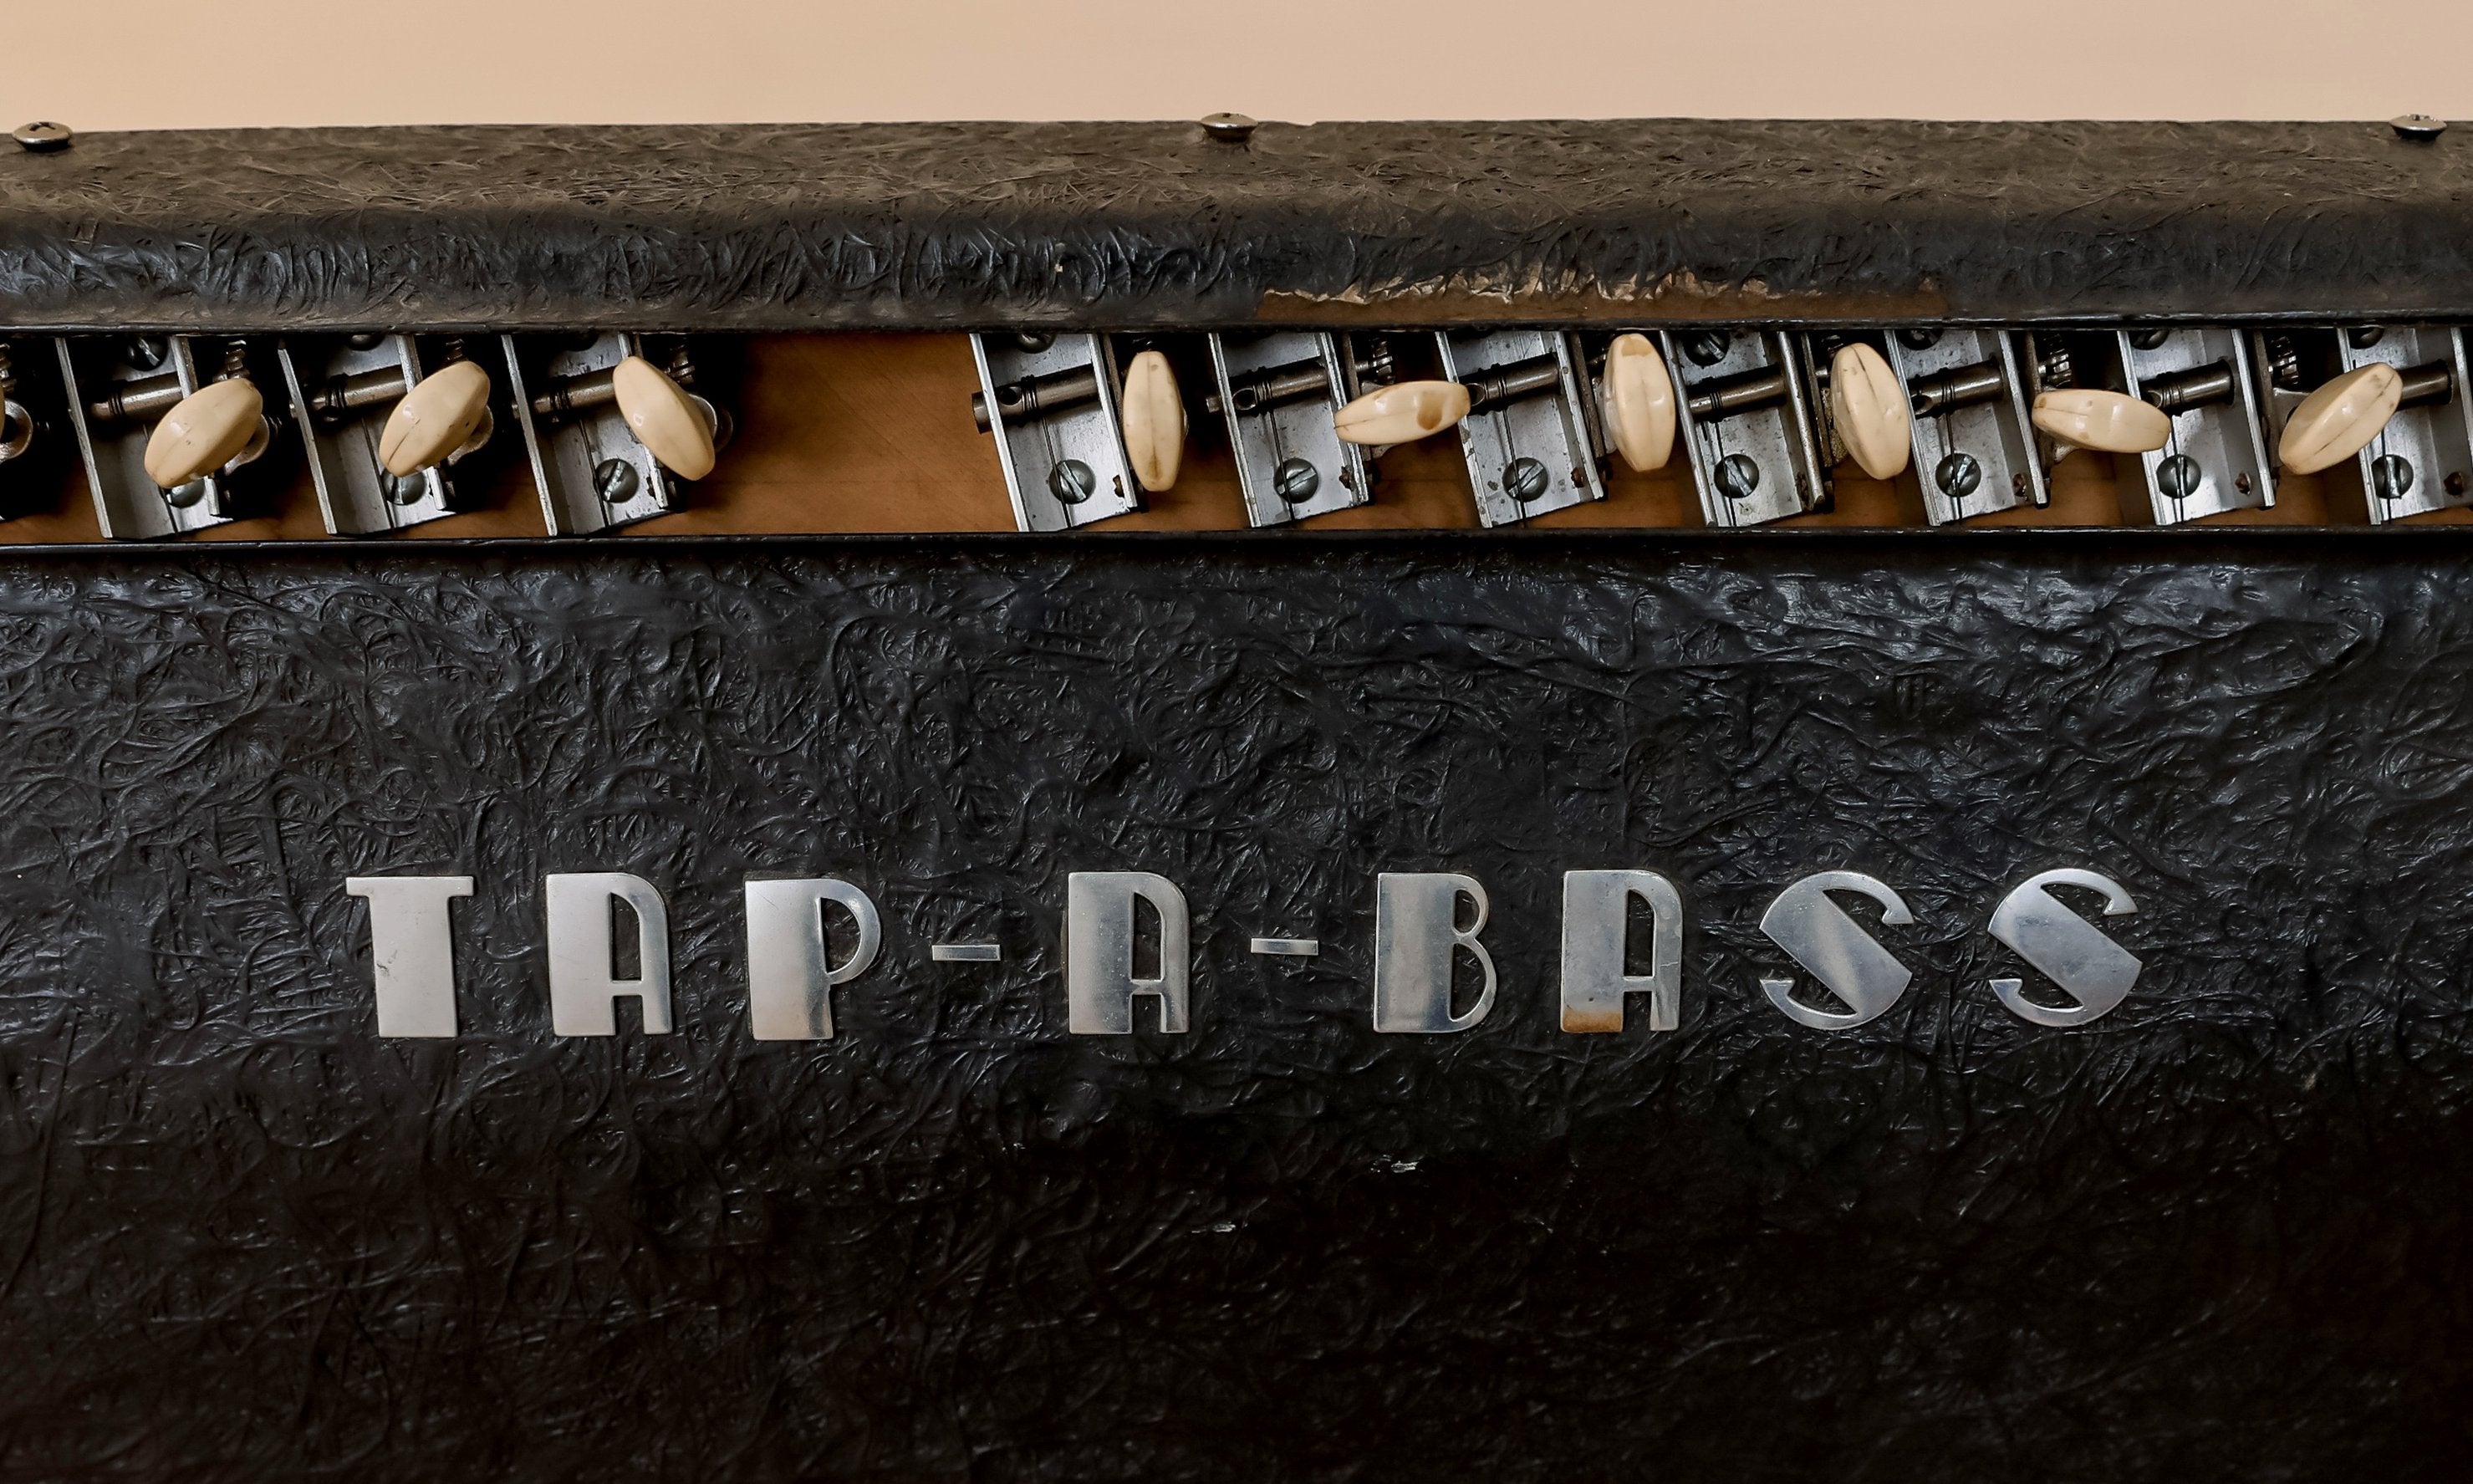 1960s Apps Enterprises Tap-A-Bass Upright Model Foot Operated Electric Bass Pedals C to C